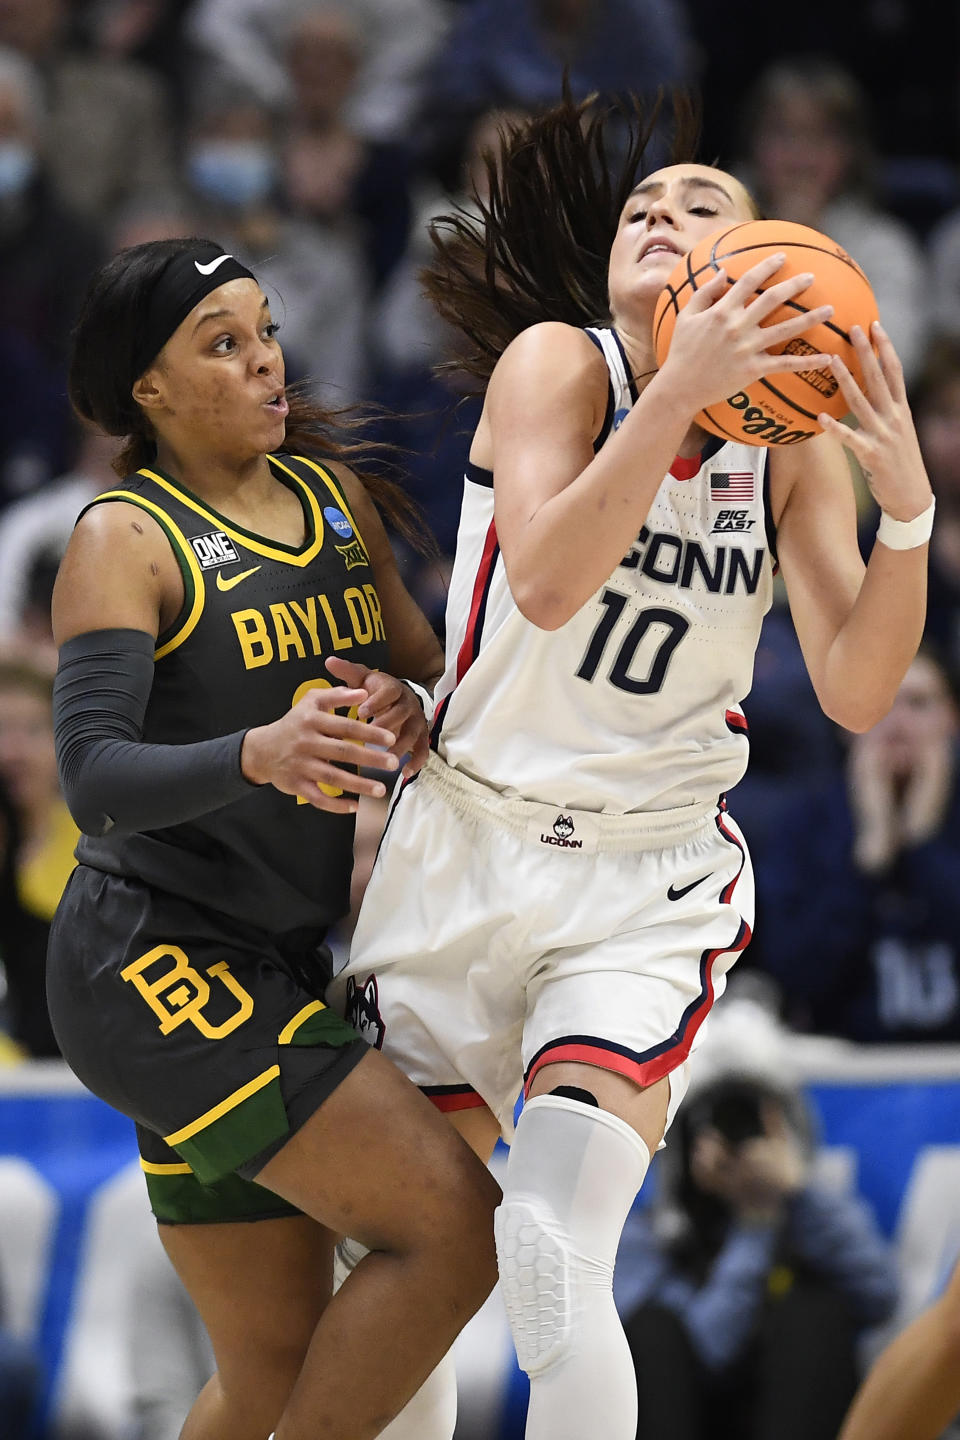 UConn's Nika Muhl (10) is guarded by Baylor's Sarah Andrews in the second half of a second-round college basketball game in the NCAA Tournament, Monday, March 20, 2023, in Storrs, Conn. (AP Photo/Jessica Hill)